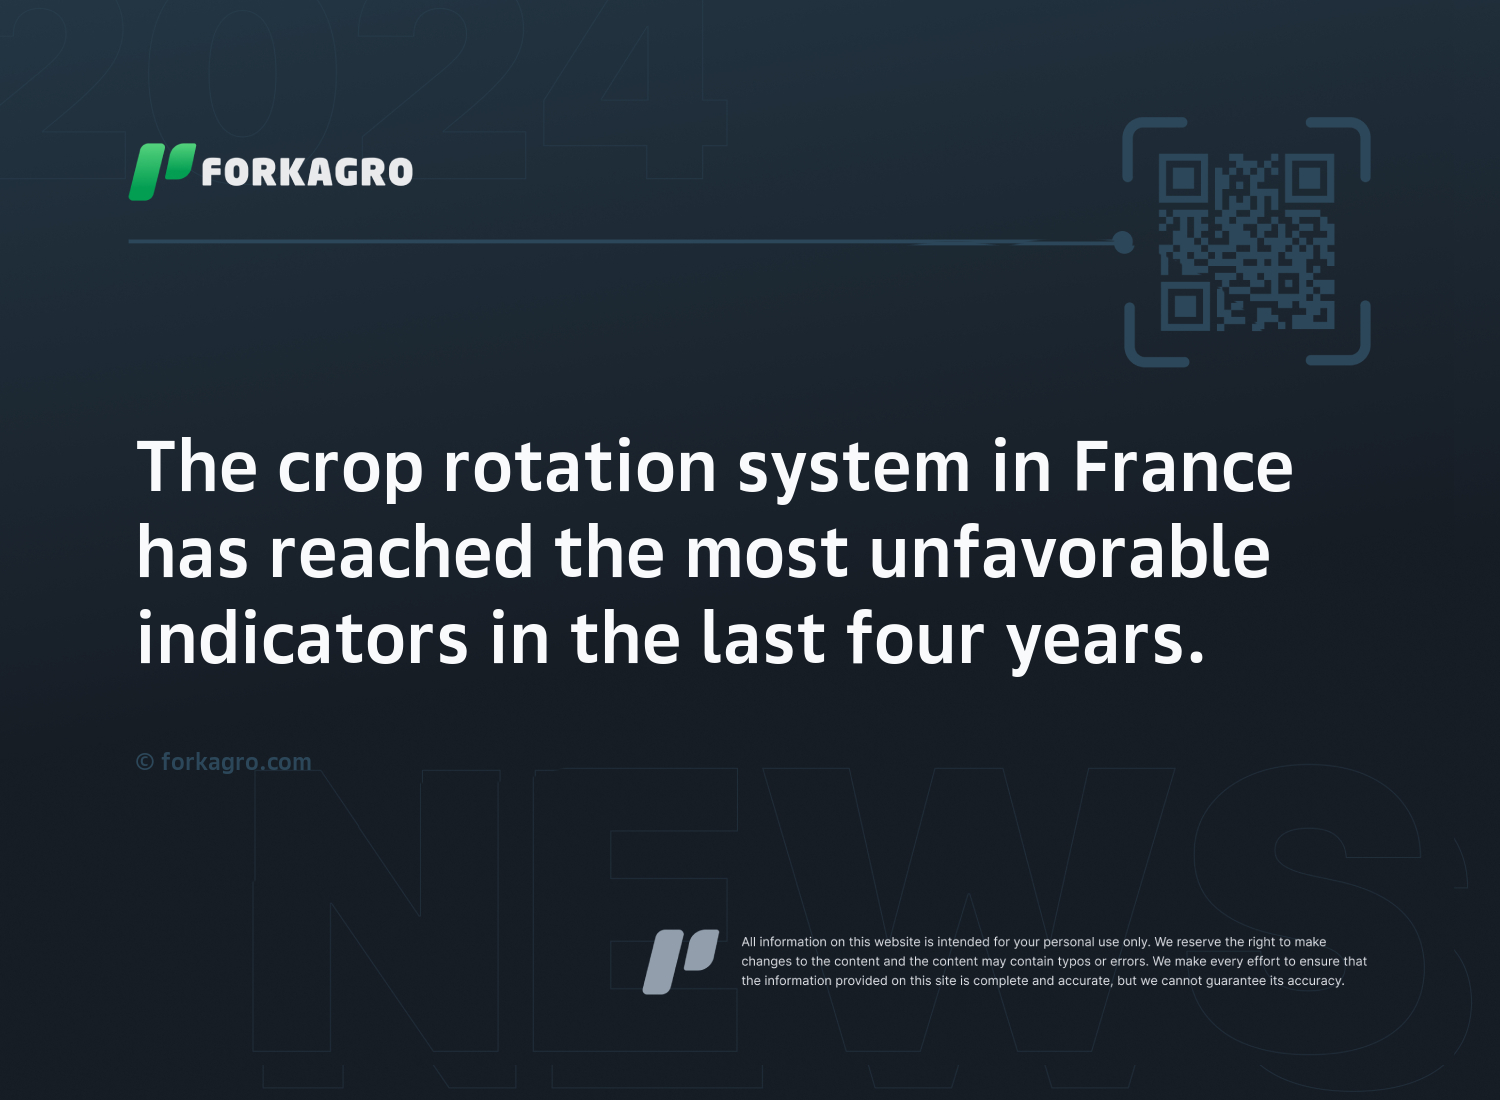 The crop rotation system in France has reached the most unfavorable indicators in the last four years.